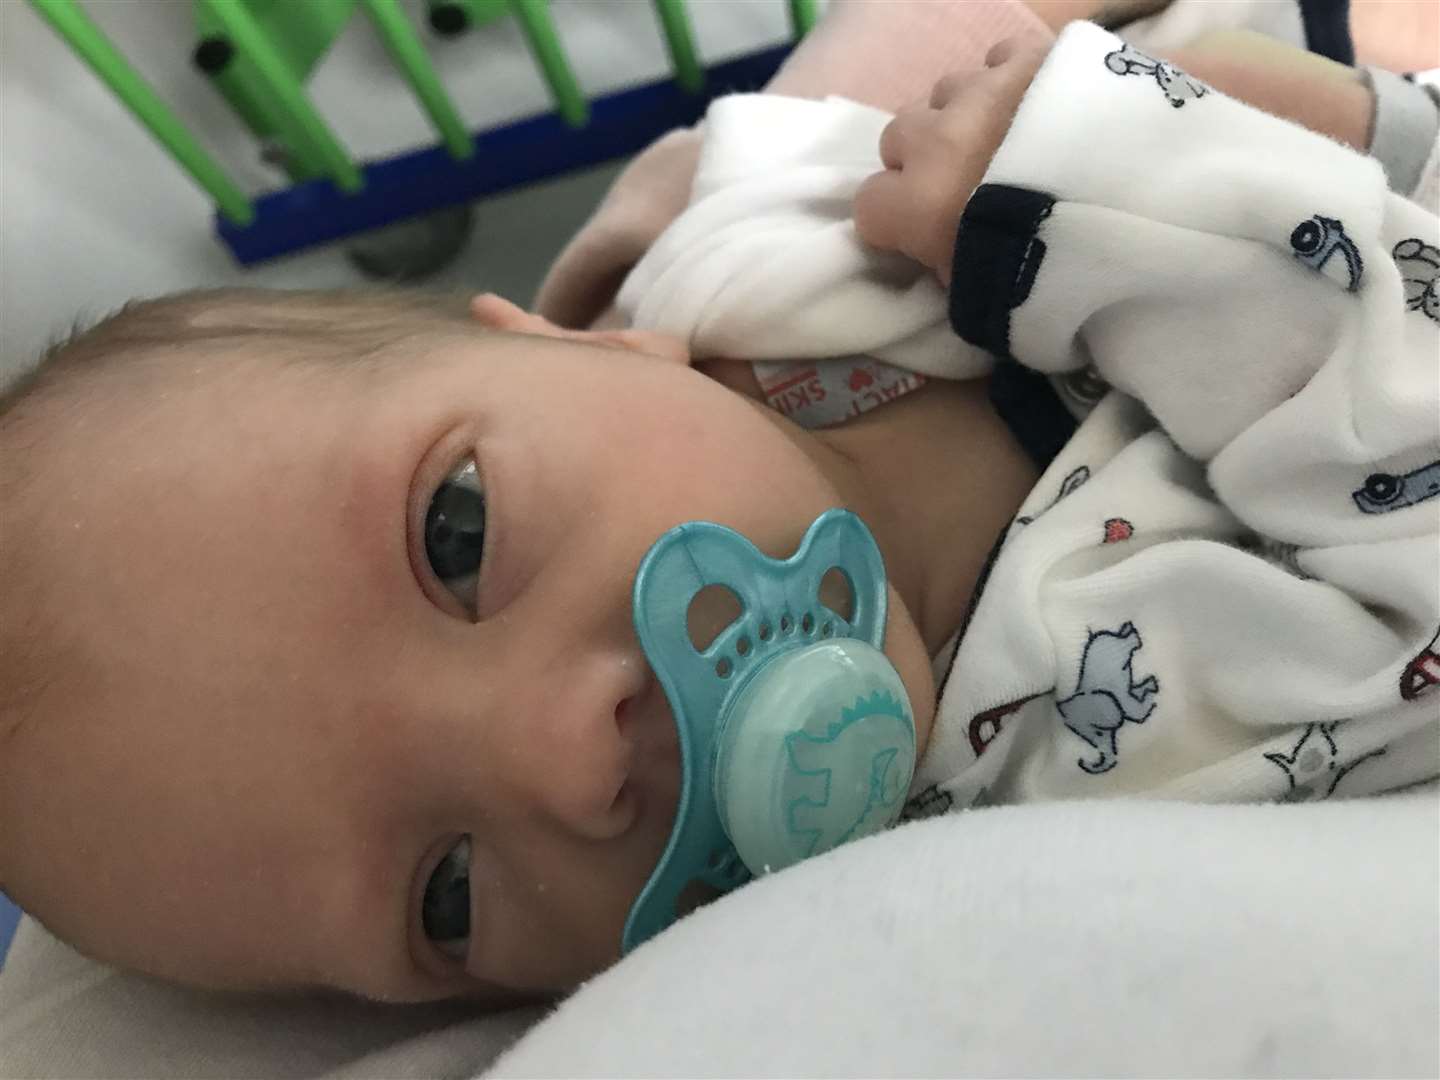 Grayson-Bleu was born five weeks prematurely and was in and out of hospital for the first few weeks of his life. Picture: Hannah Martin